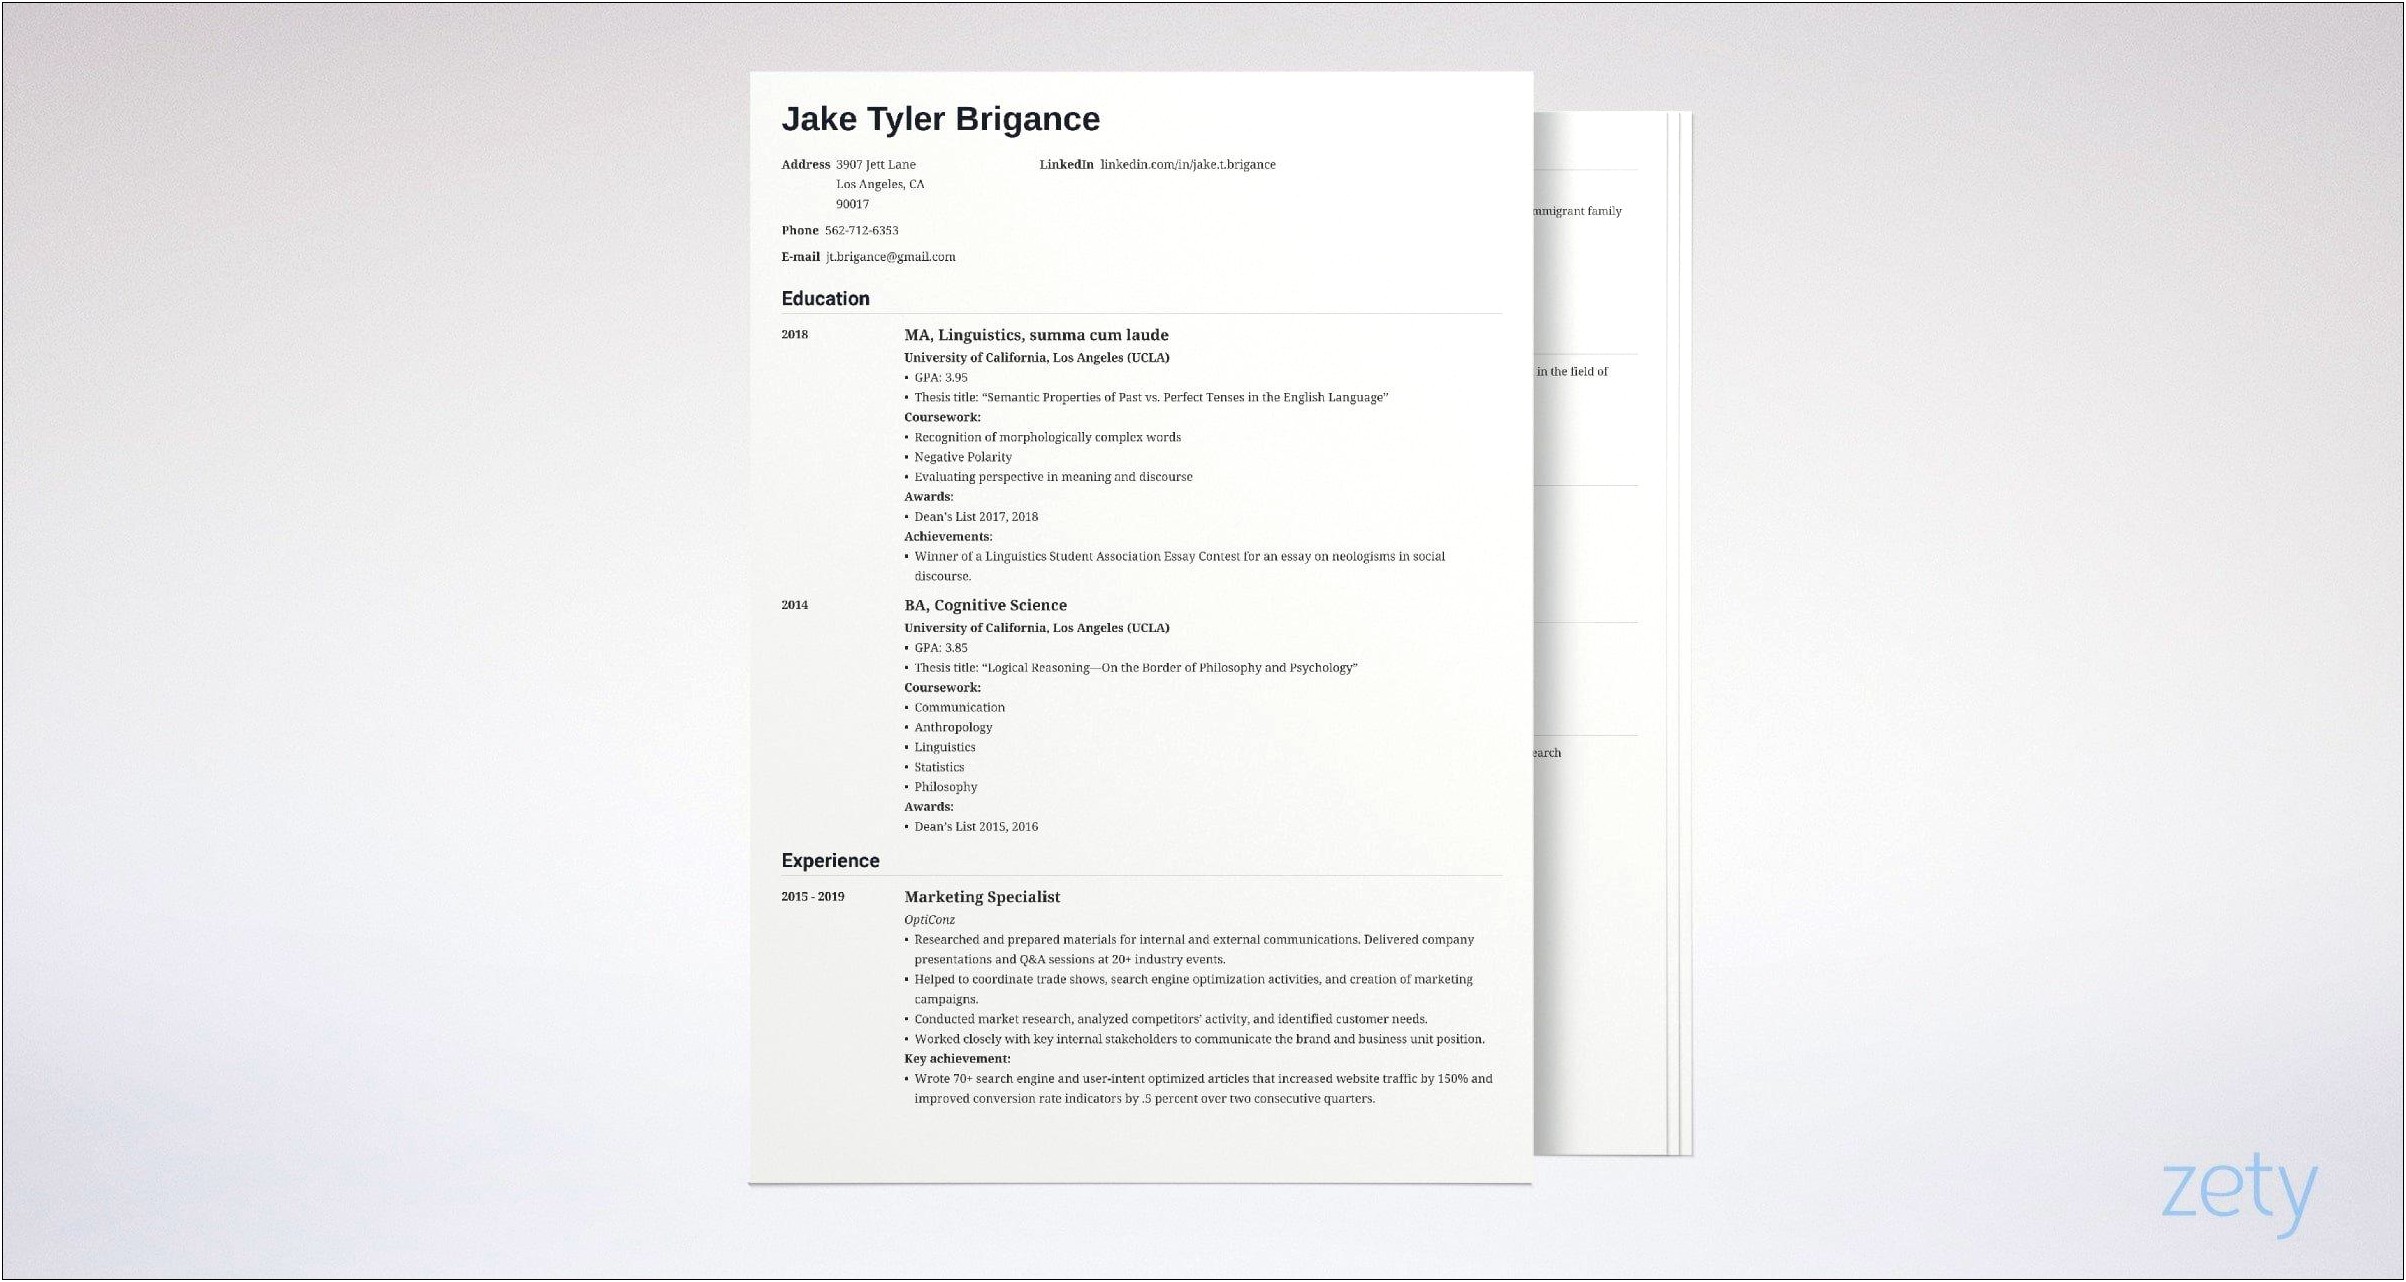 Typical Resume To Get Into Top Law School